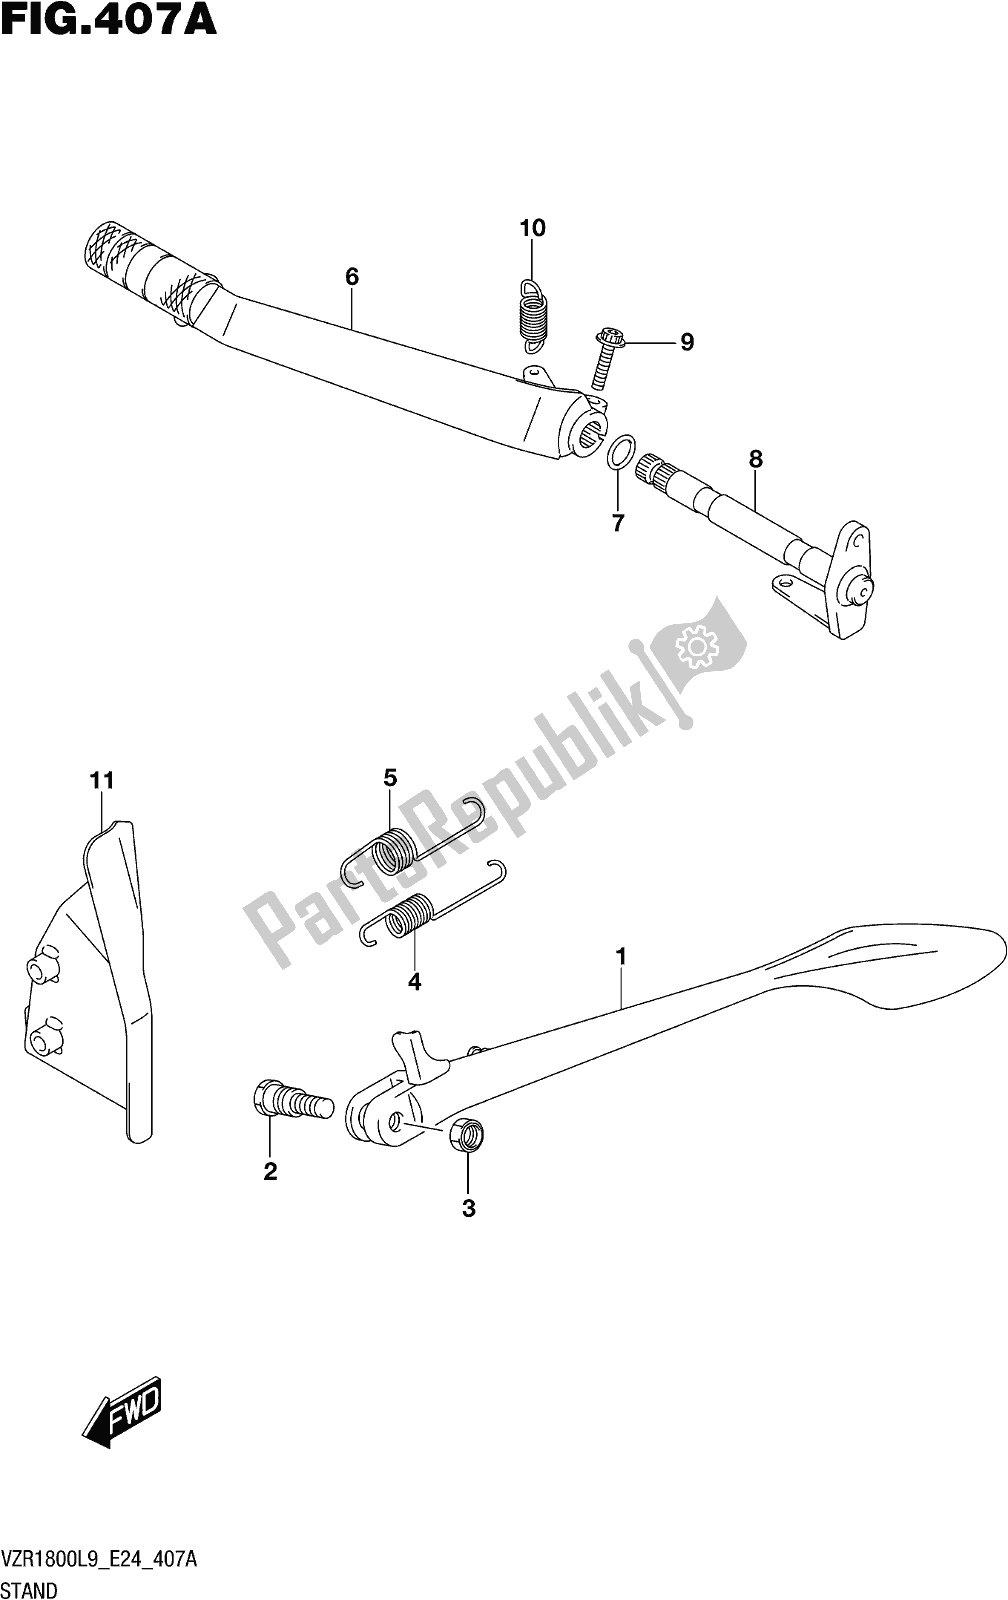 All parts for the Fig. 407a Stand (vzr1800l9 E24) of the Suzuki VZR 1800 2019